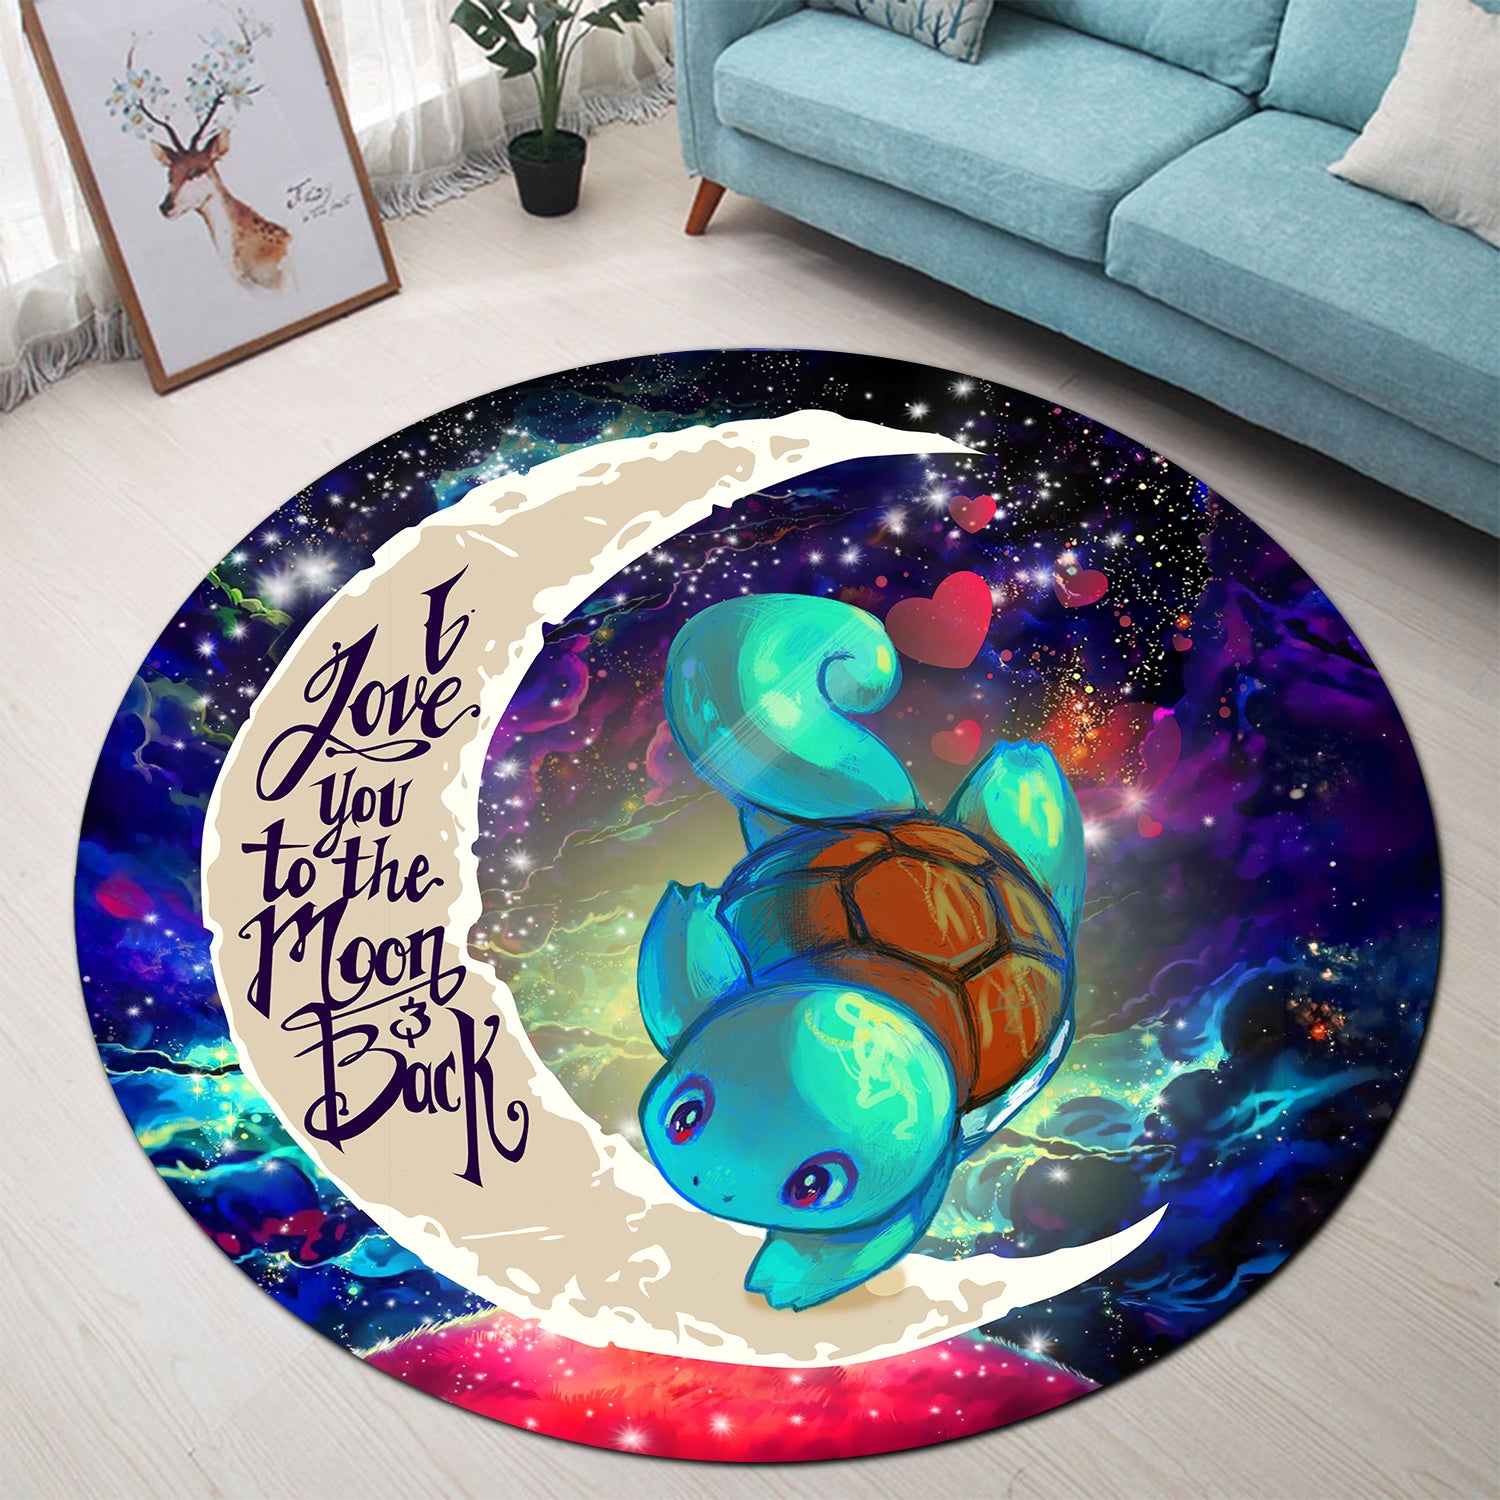 Squirtle Pokemon Love You To The Moon Galaxy Round Carpet Rug Bedroom Livingroom Home Decor Nearkii